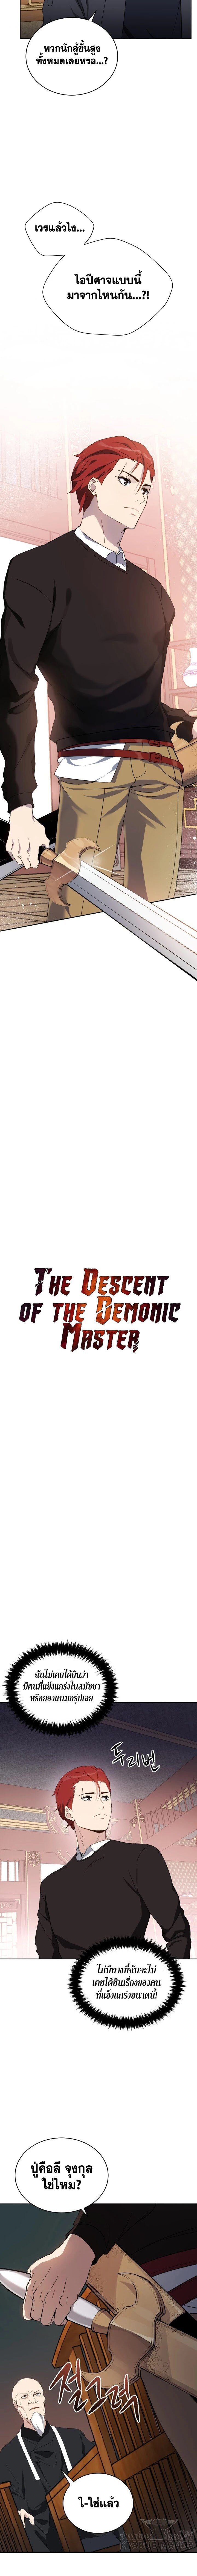 The Descent of the Demonic Master 74 (3)